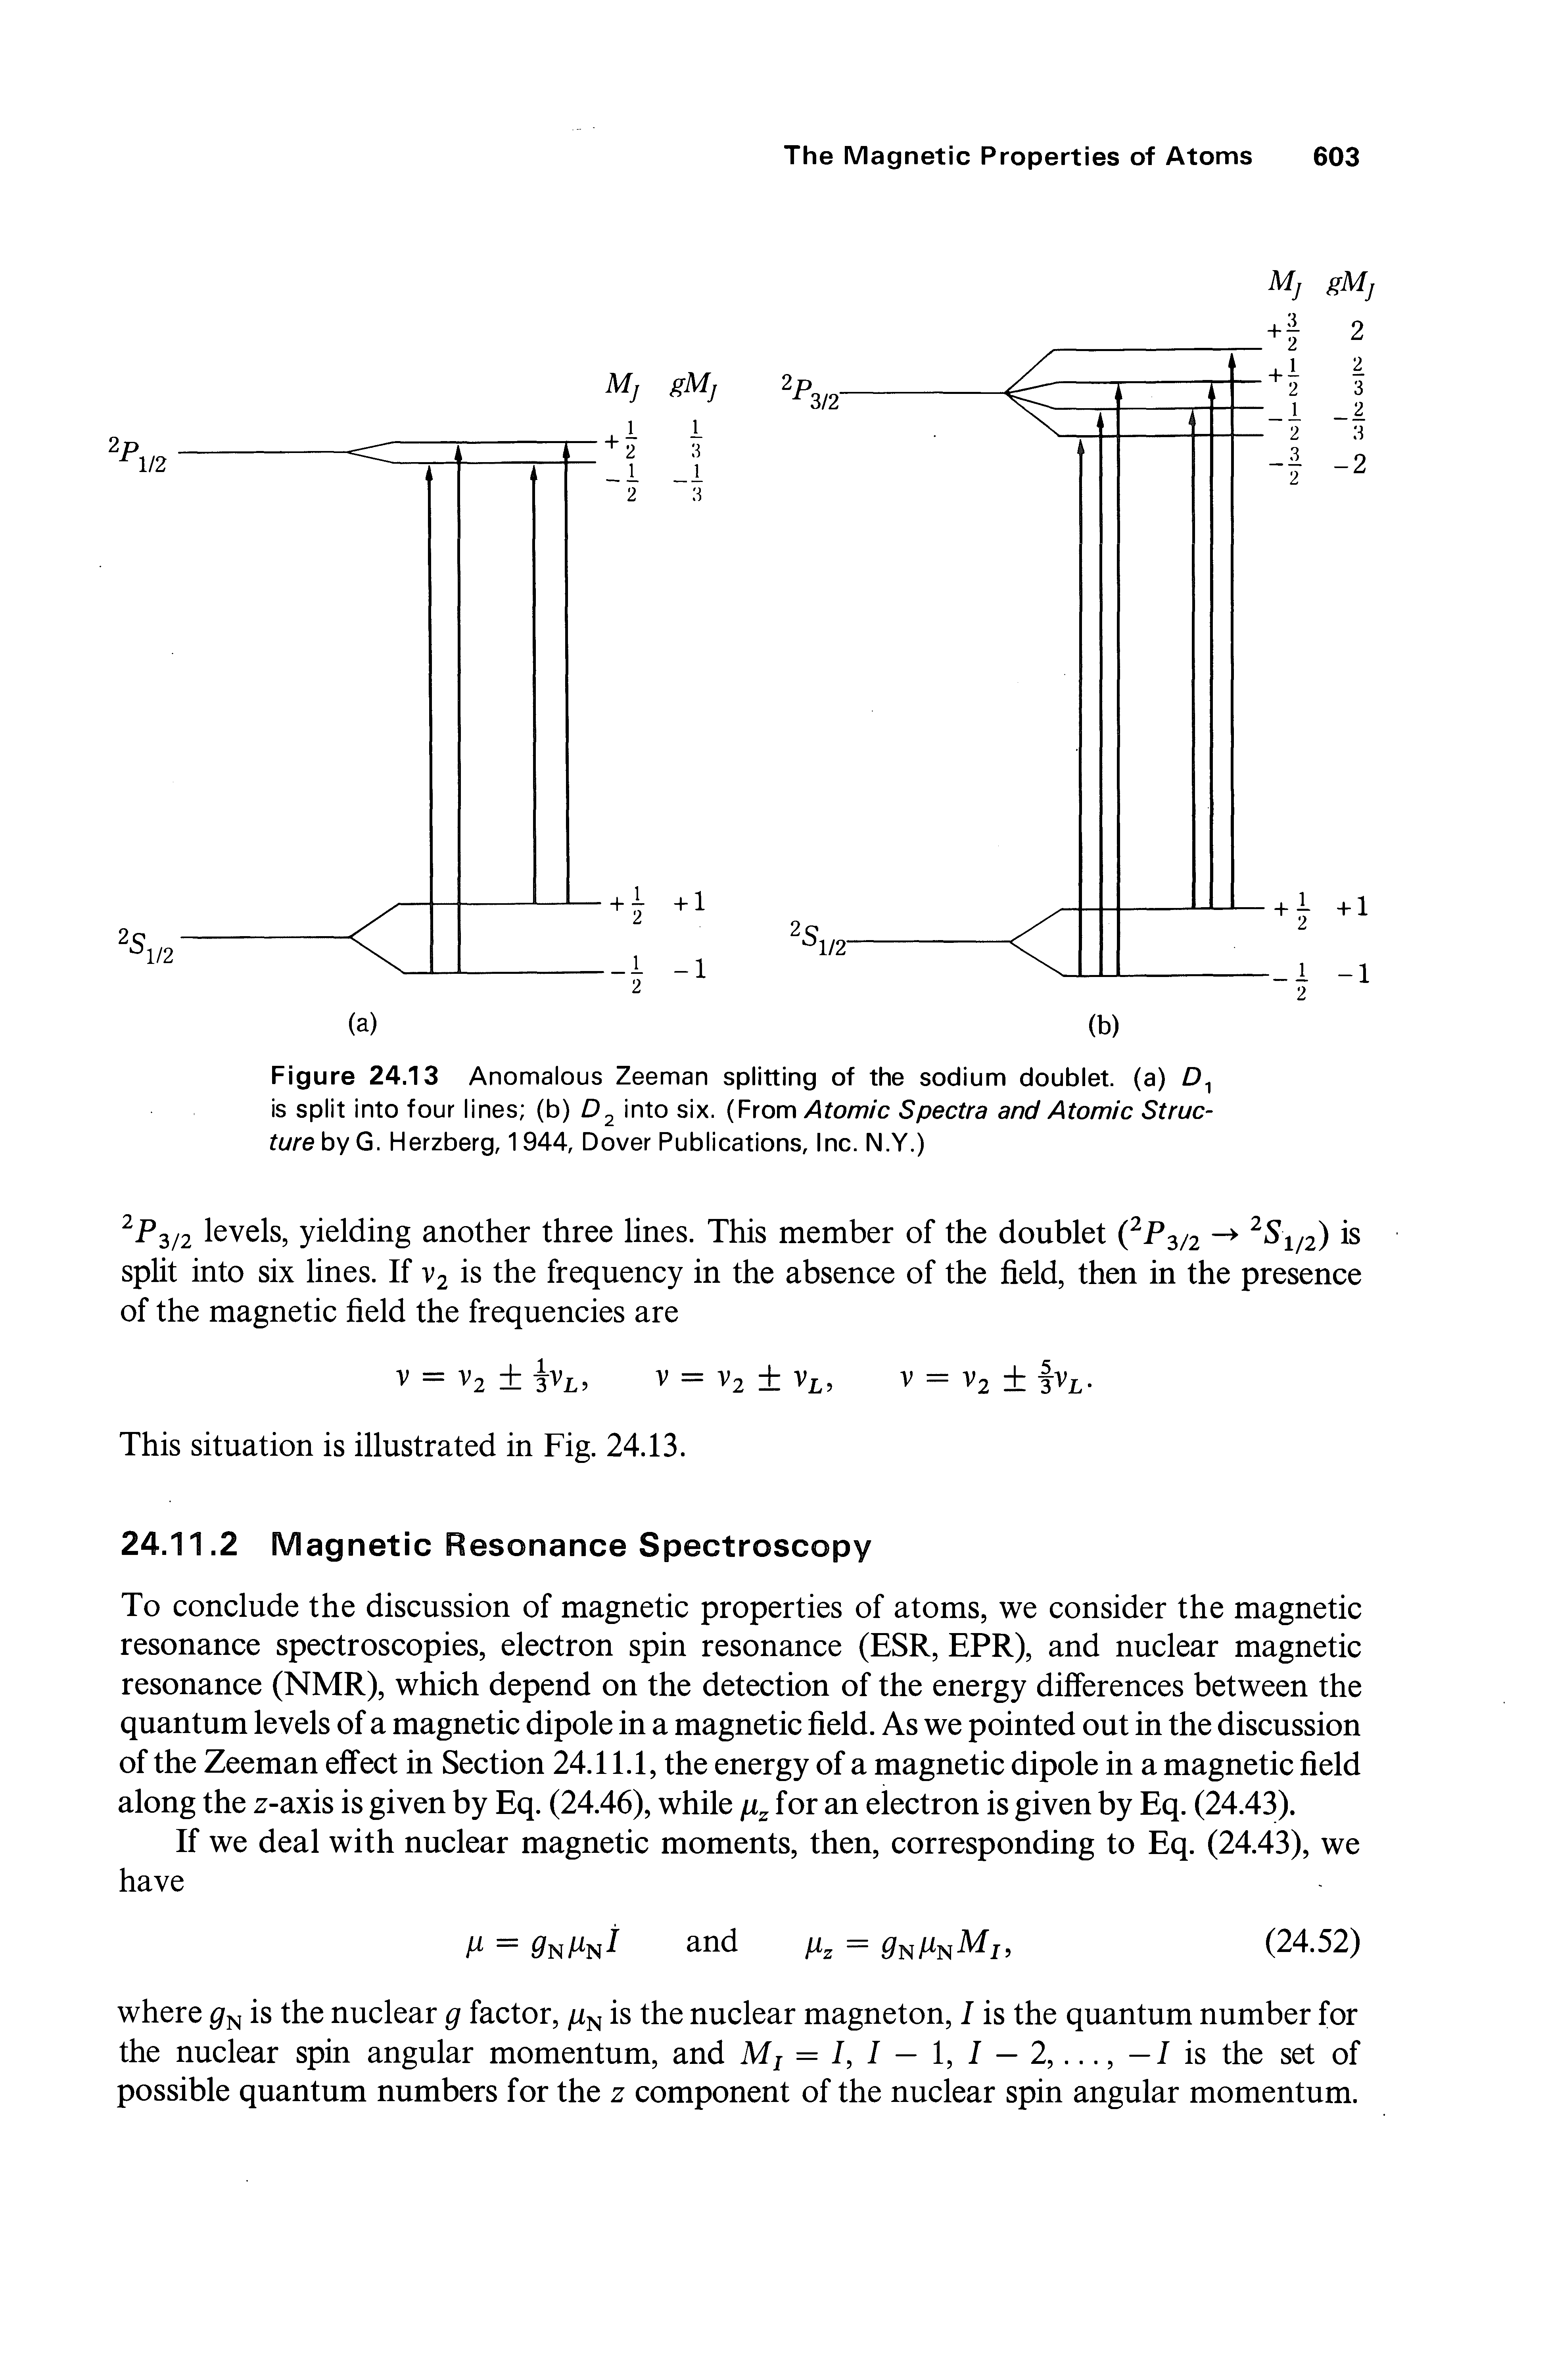 Figure 24.13 Anomalous Zeeman splitting of the sodium doublet, (a) is split into four lines (b) D into six. (From Atomic Spectra and Atomic Structure by G. Herzberg, 1944, Dover Publications, Inc. N.Y.)...